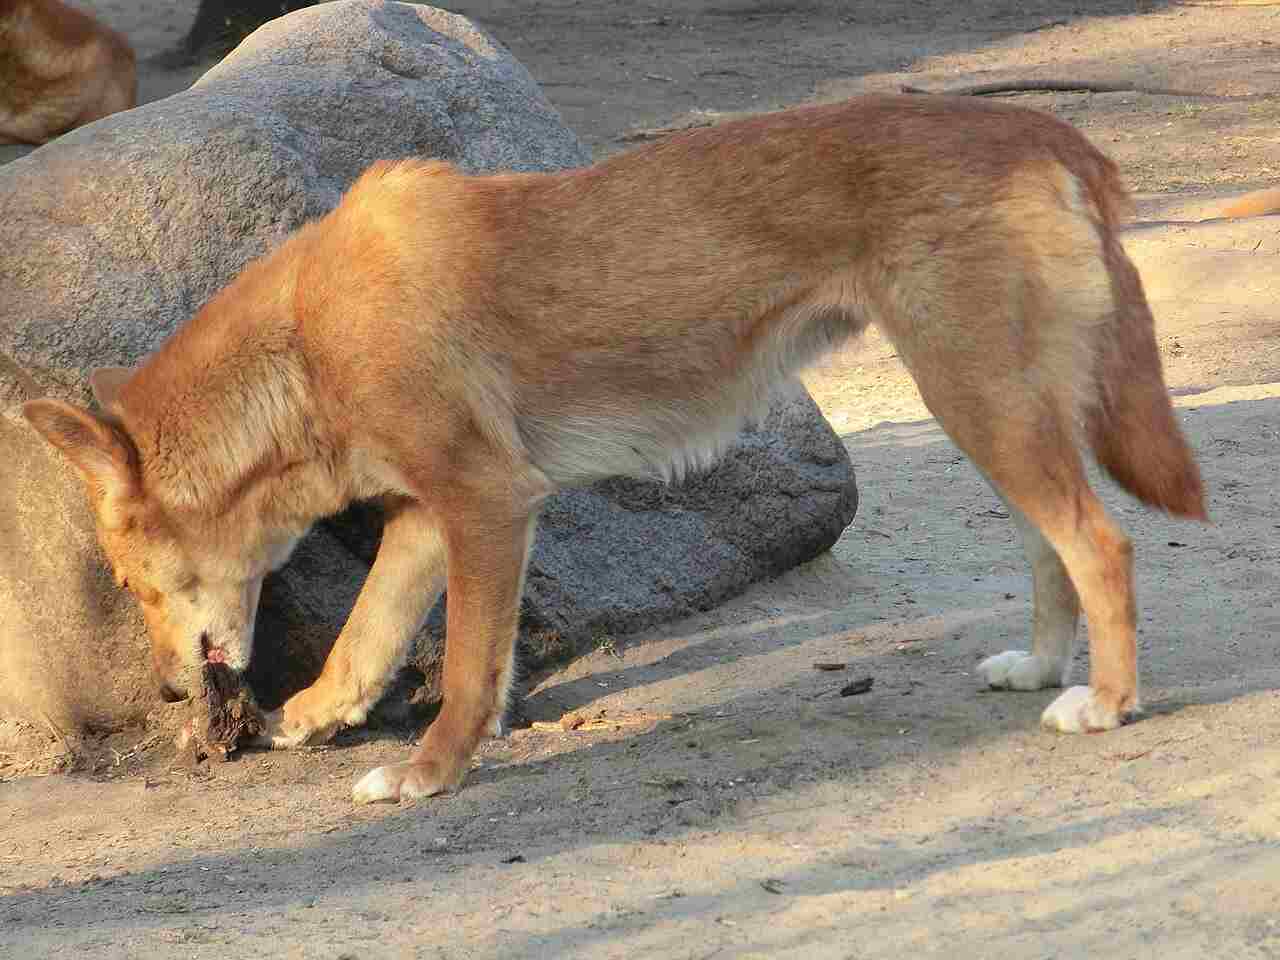 What Eats Lizards: Secondary Consumers like Dingoes and Coyotes Can Prey On Lizards (Credit: Inugami-bargho 2012 .CC BY-SA 3.0.)